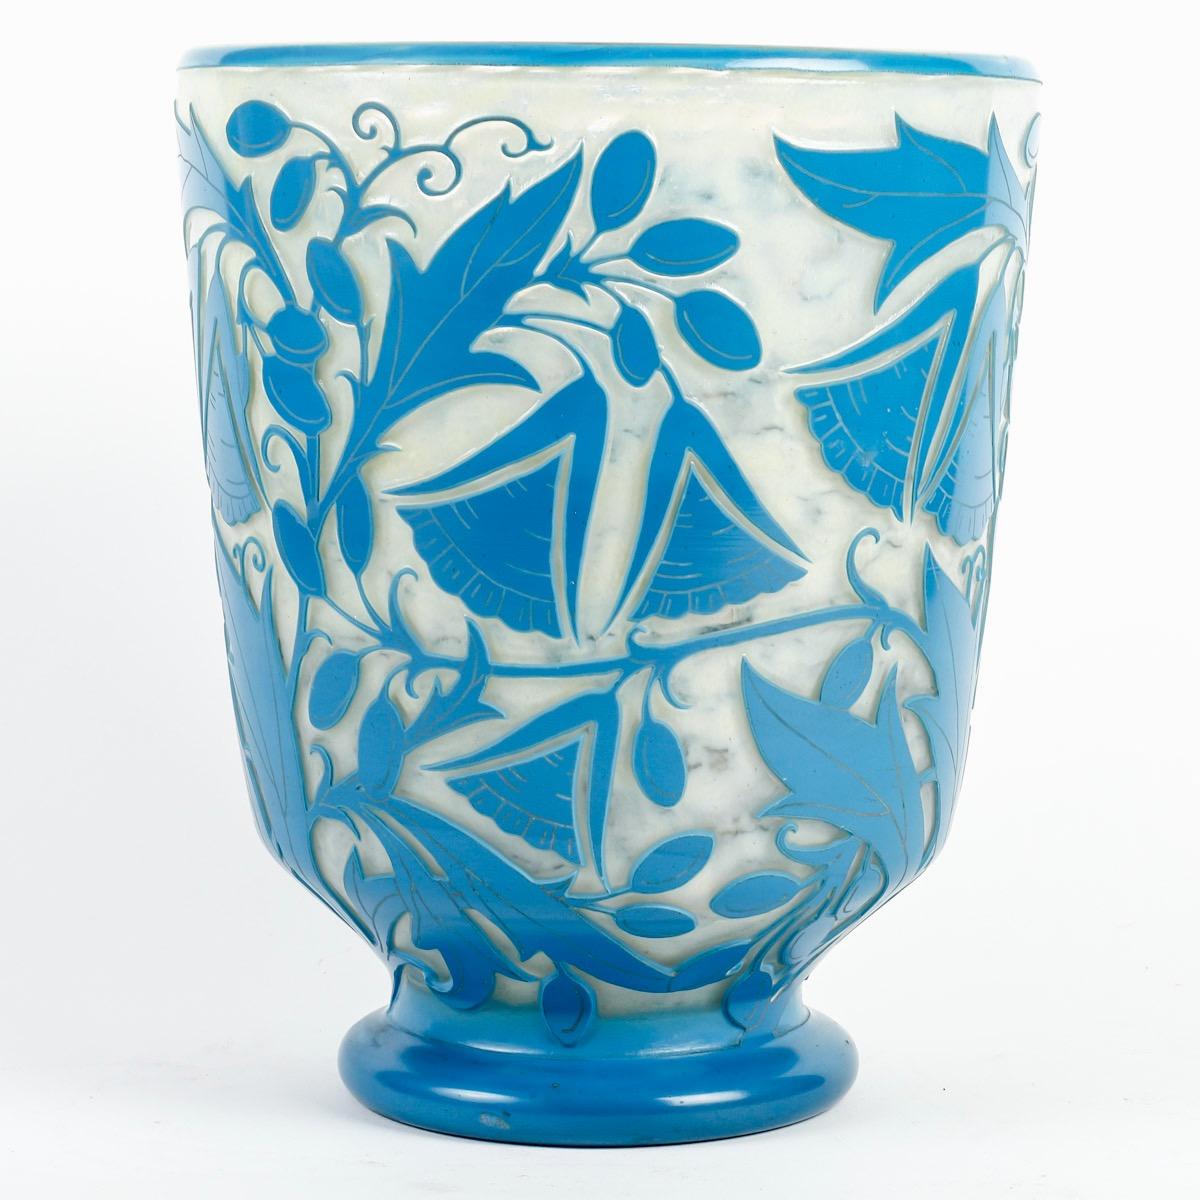 Daum Nancy France Acid-Etched Glass “Campanulas” Vase circa 1930
Vase with flared body and circular heel in blue glass with acid-etched hollow decoration of geometric campanulas on a white background 
Signed 